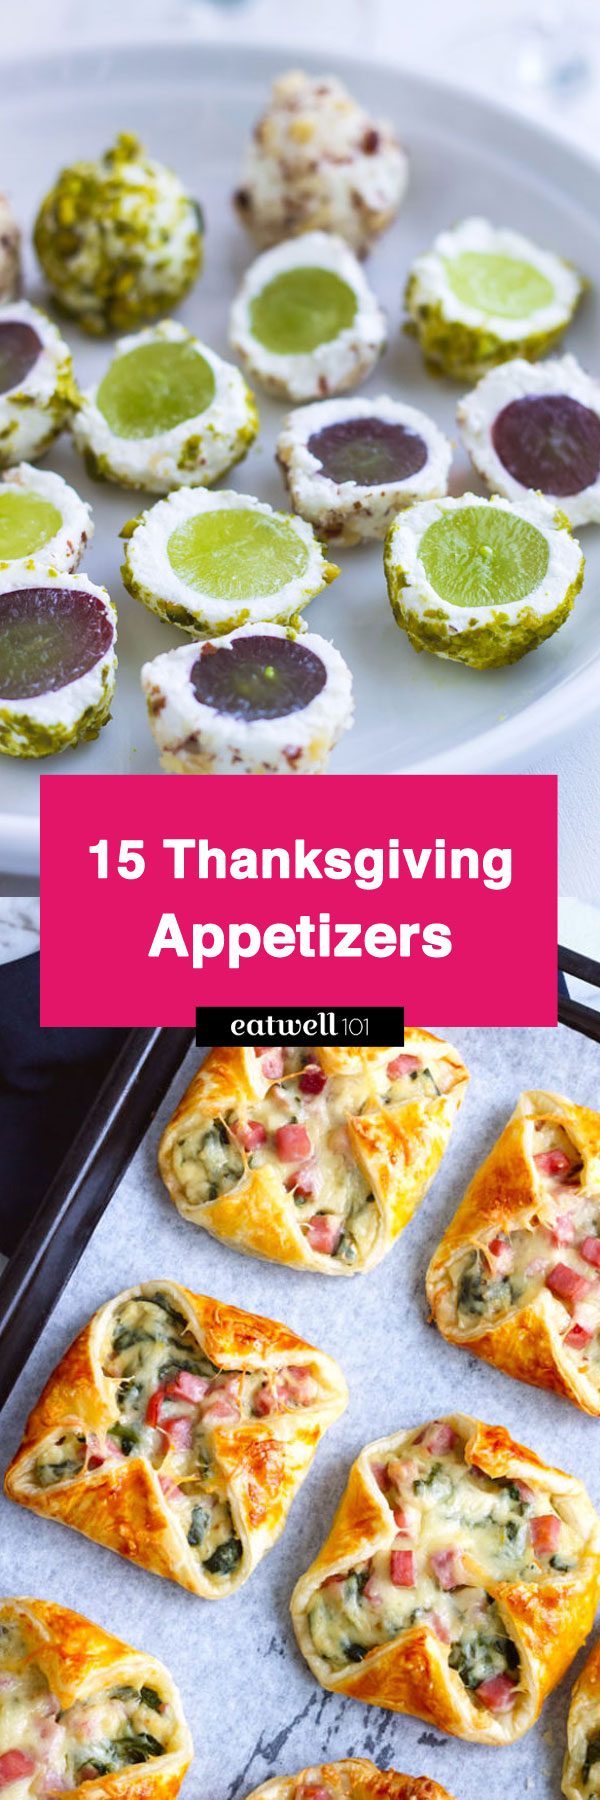 Thanksgiving Appetizer Recipes - These delicious ideas for Turkey Day appetizers will leave your guests begging for more. 